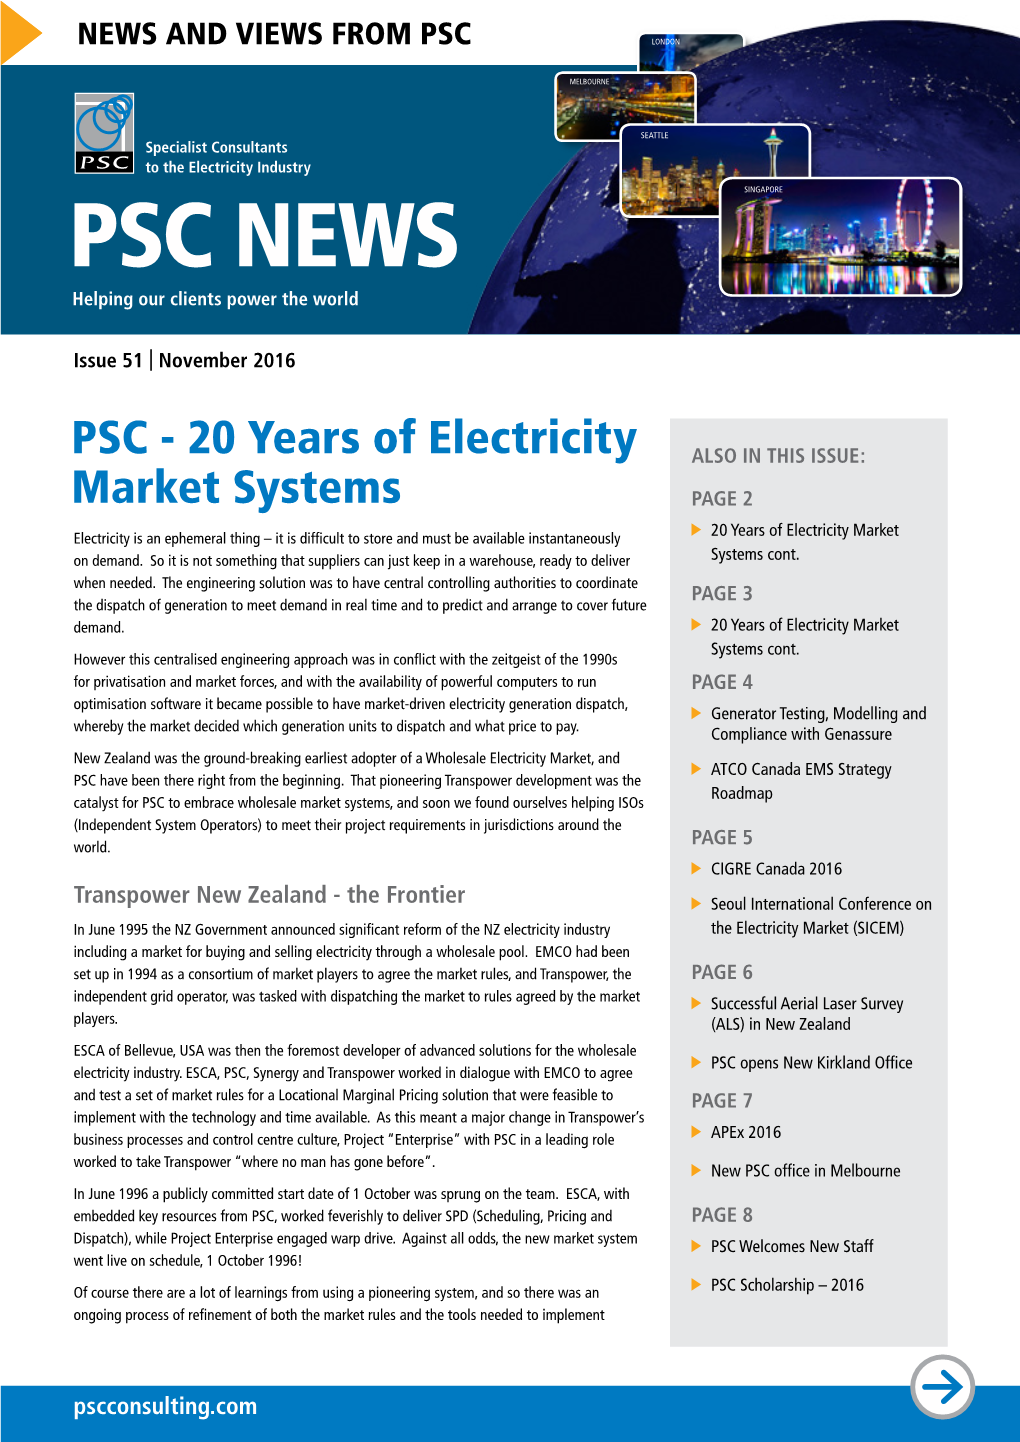 Ramesh Hariharan PSC Is Pleased to Welcome Ramesh Hariharan, a Power Systems Engineer with More Than 10 Years of Experience in the Electrical Power Industry